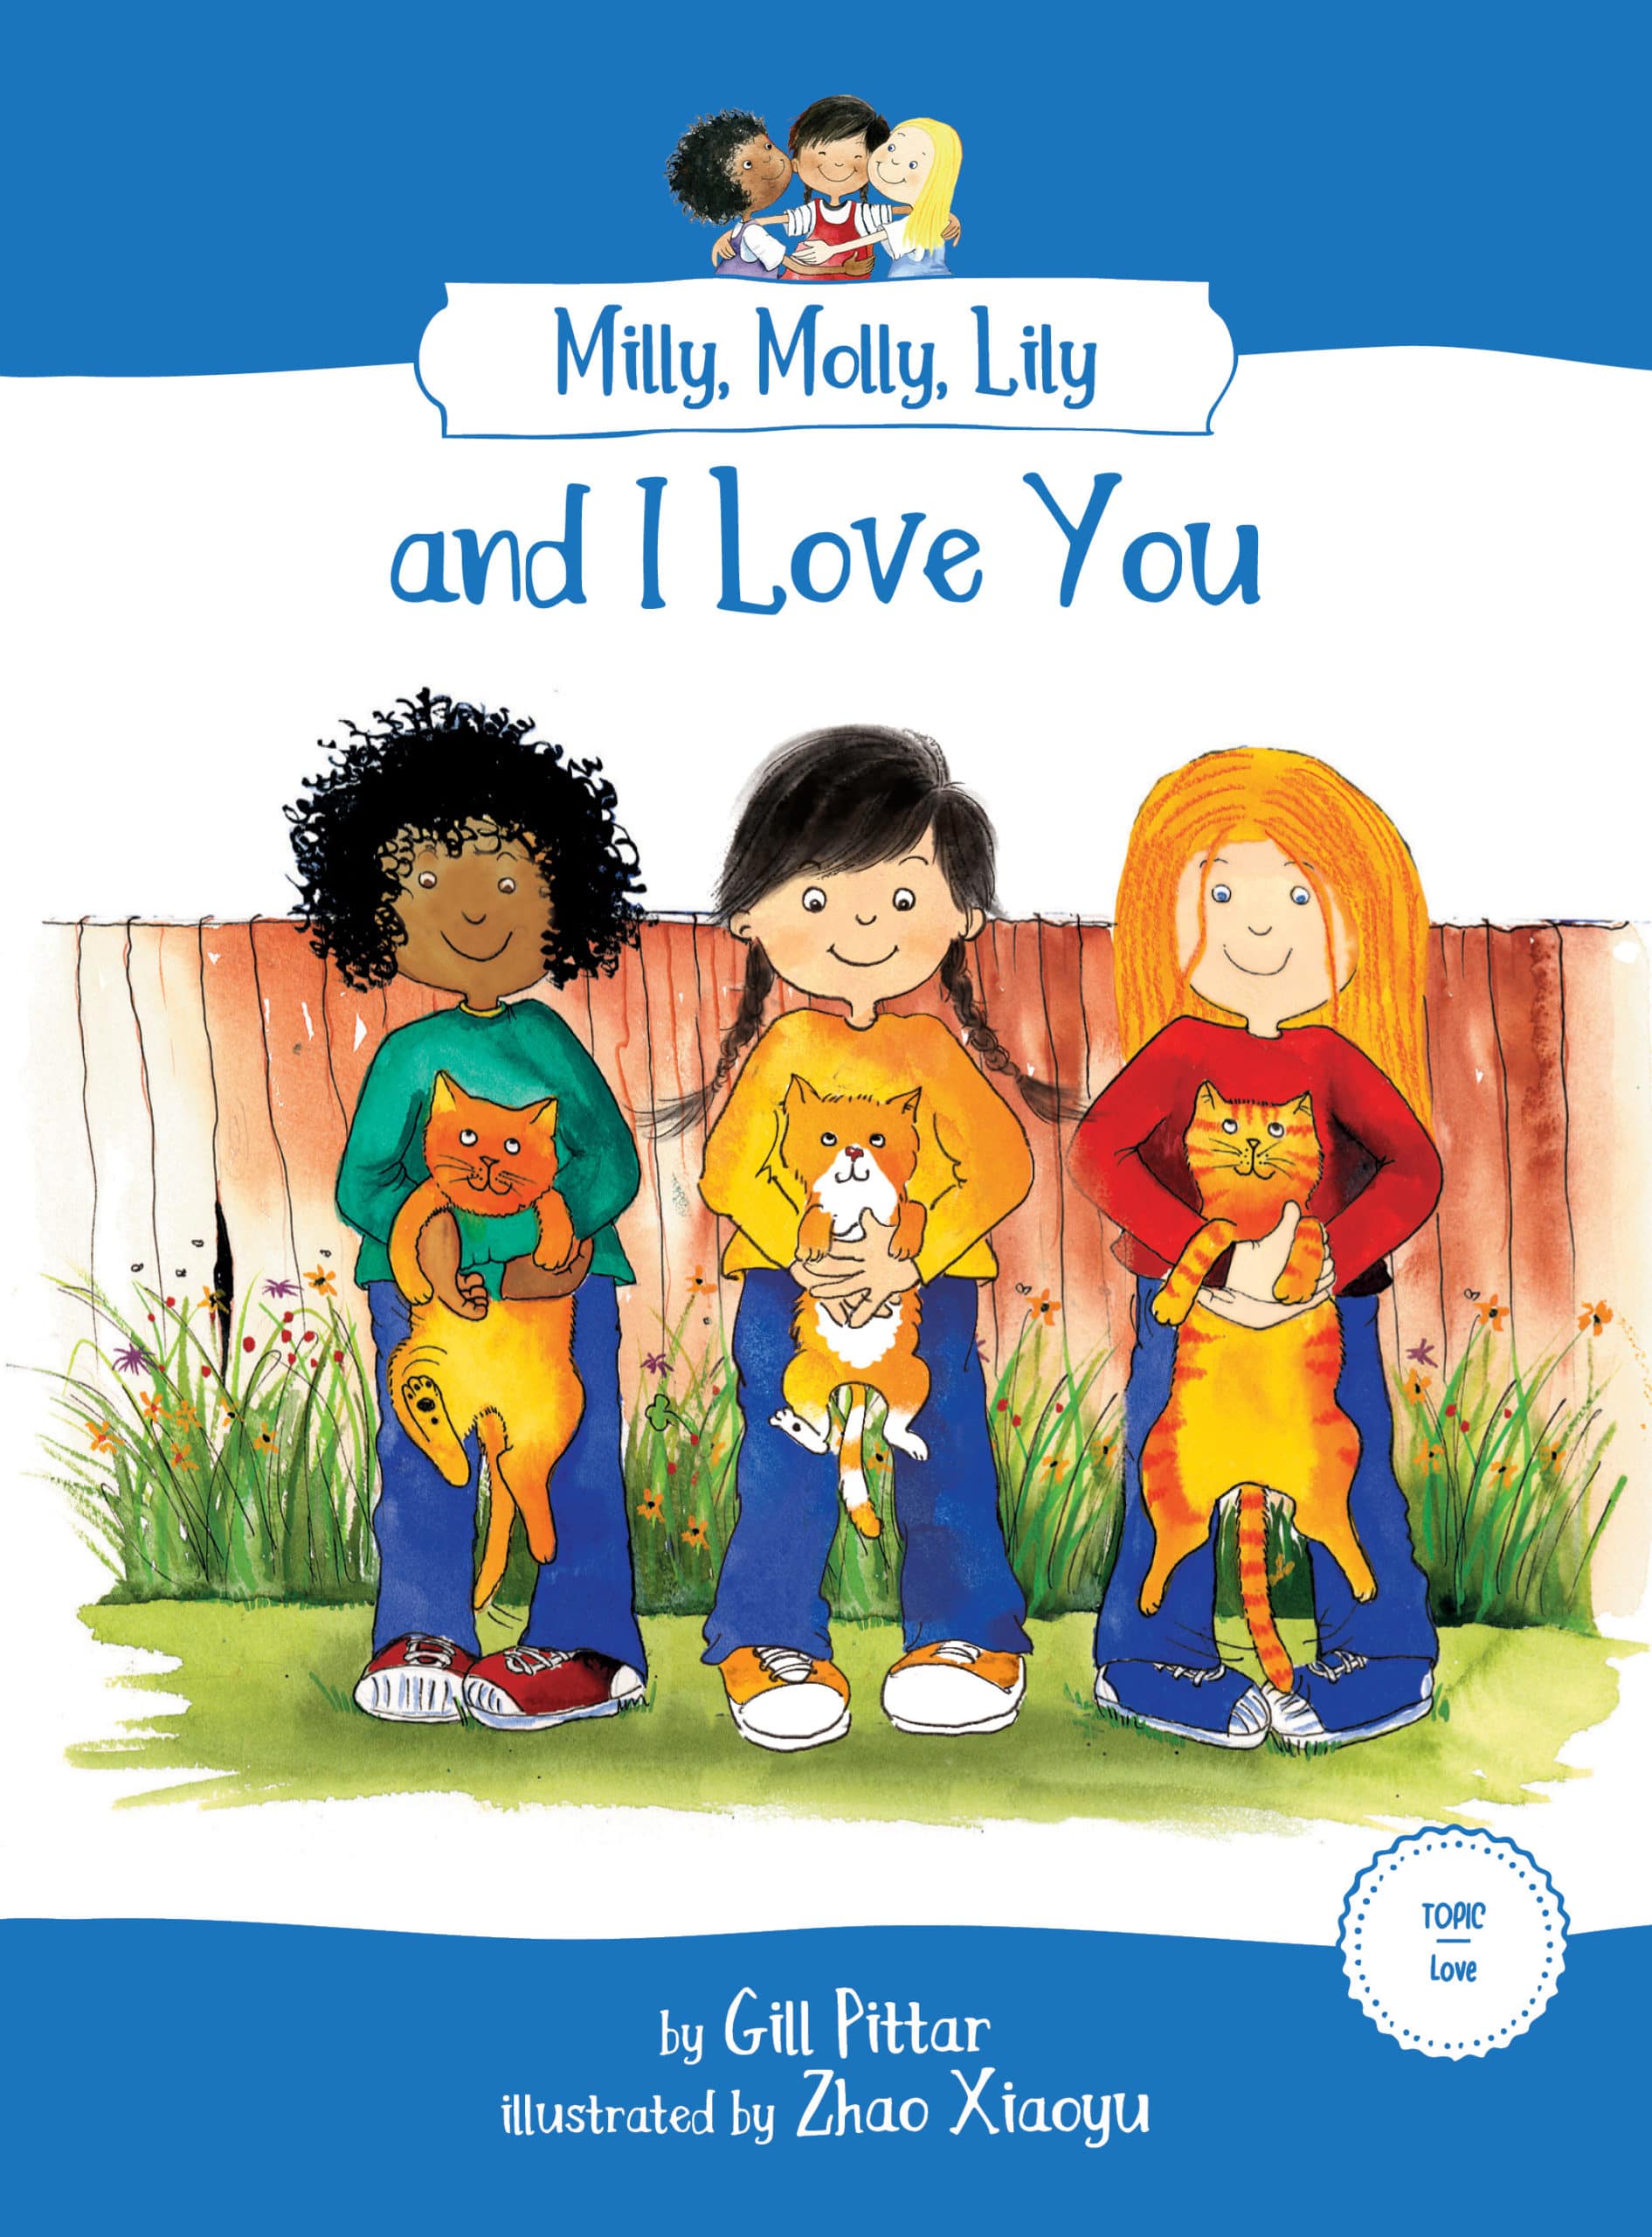 Milly, Molly, Lily and I Love You book cover